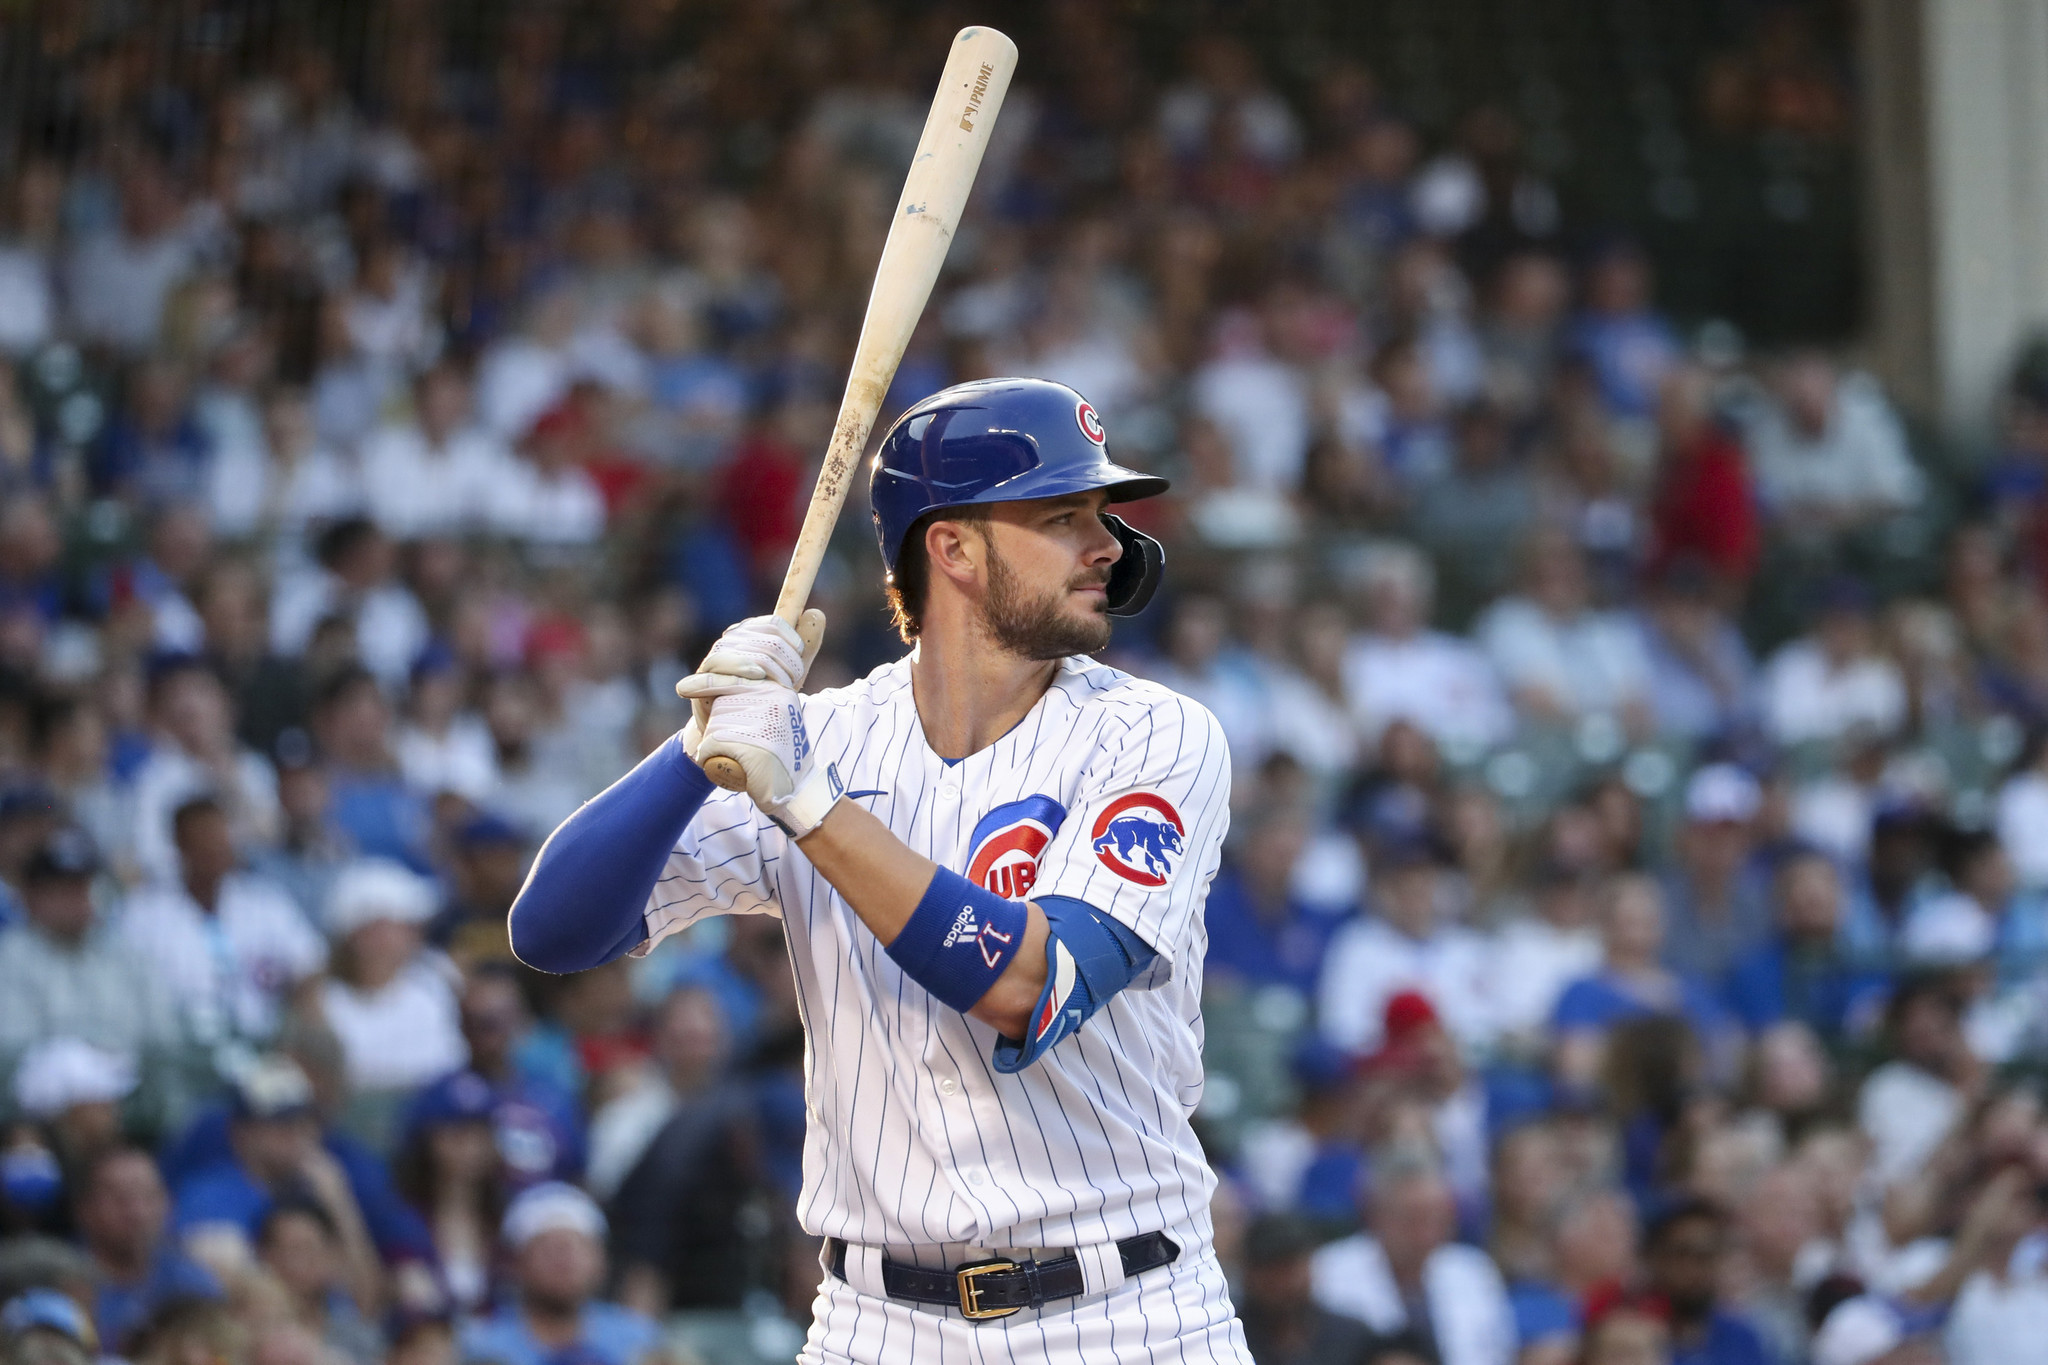 Extremely Gruntled Kris Bryant Confident in Cubs Future, Ready to Run  Through Wall for David Ross - Cubs Insider